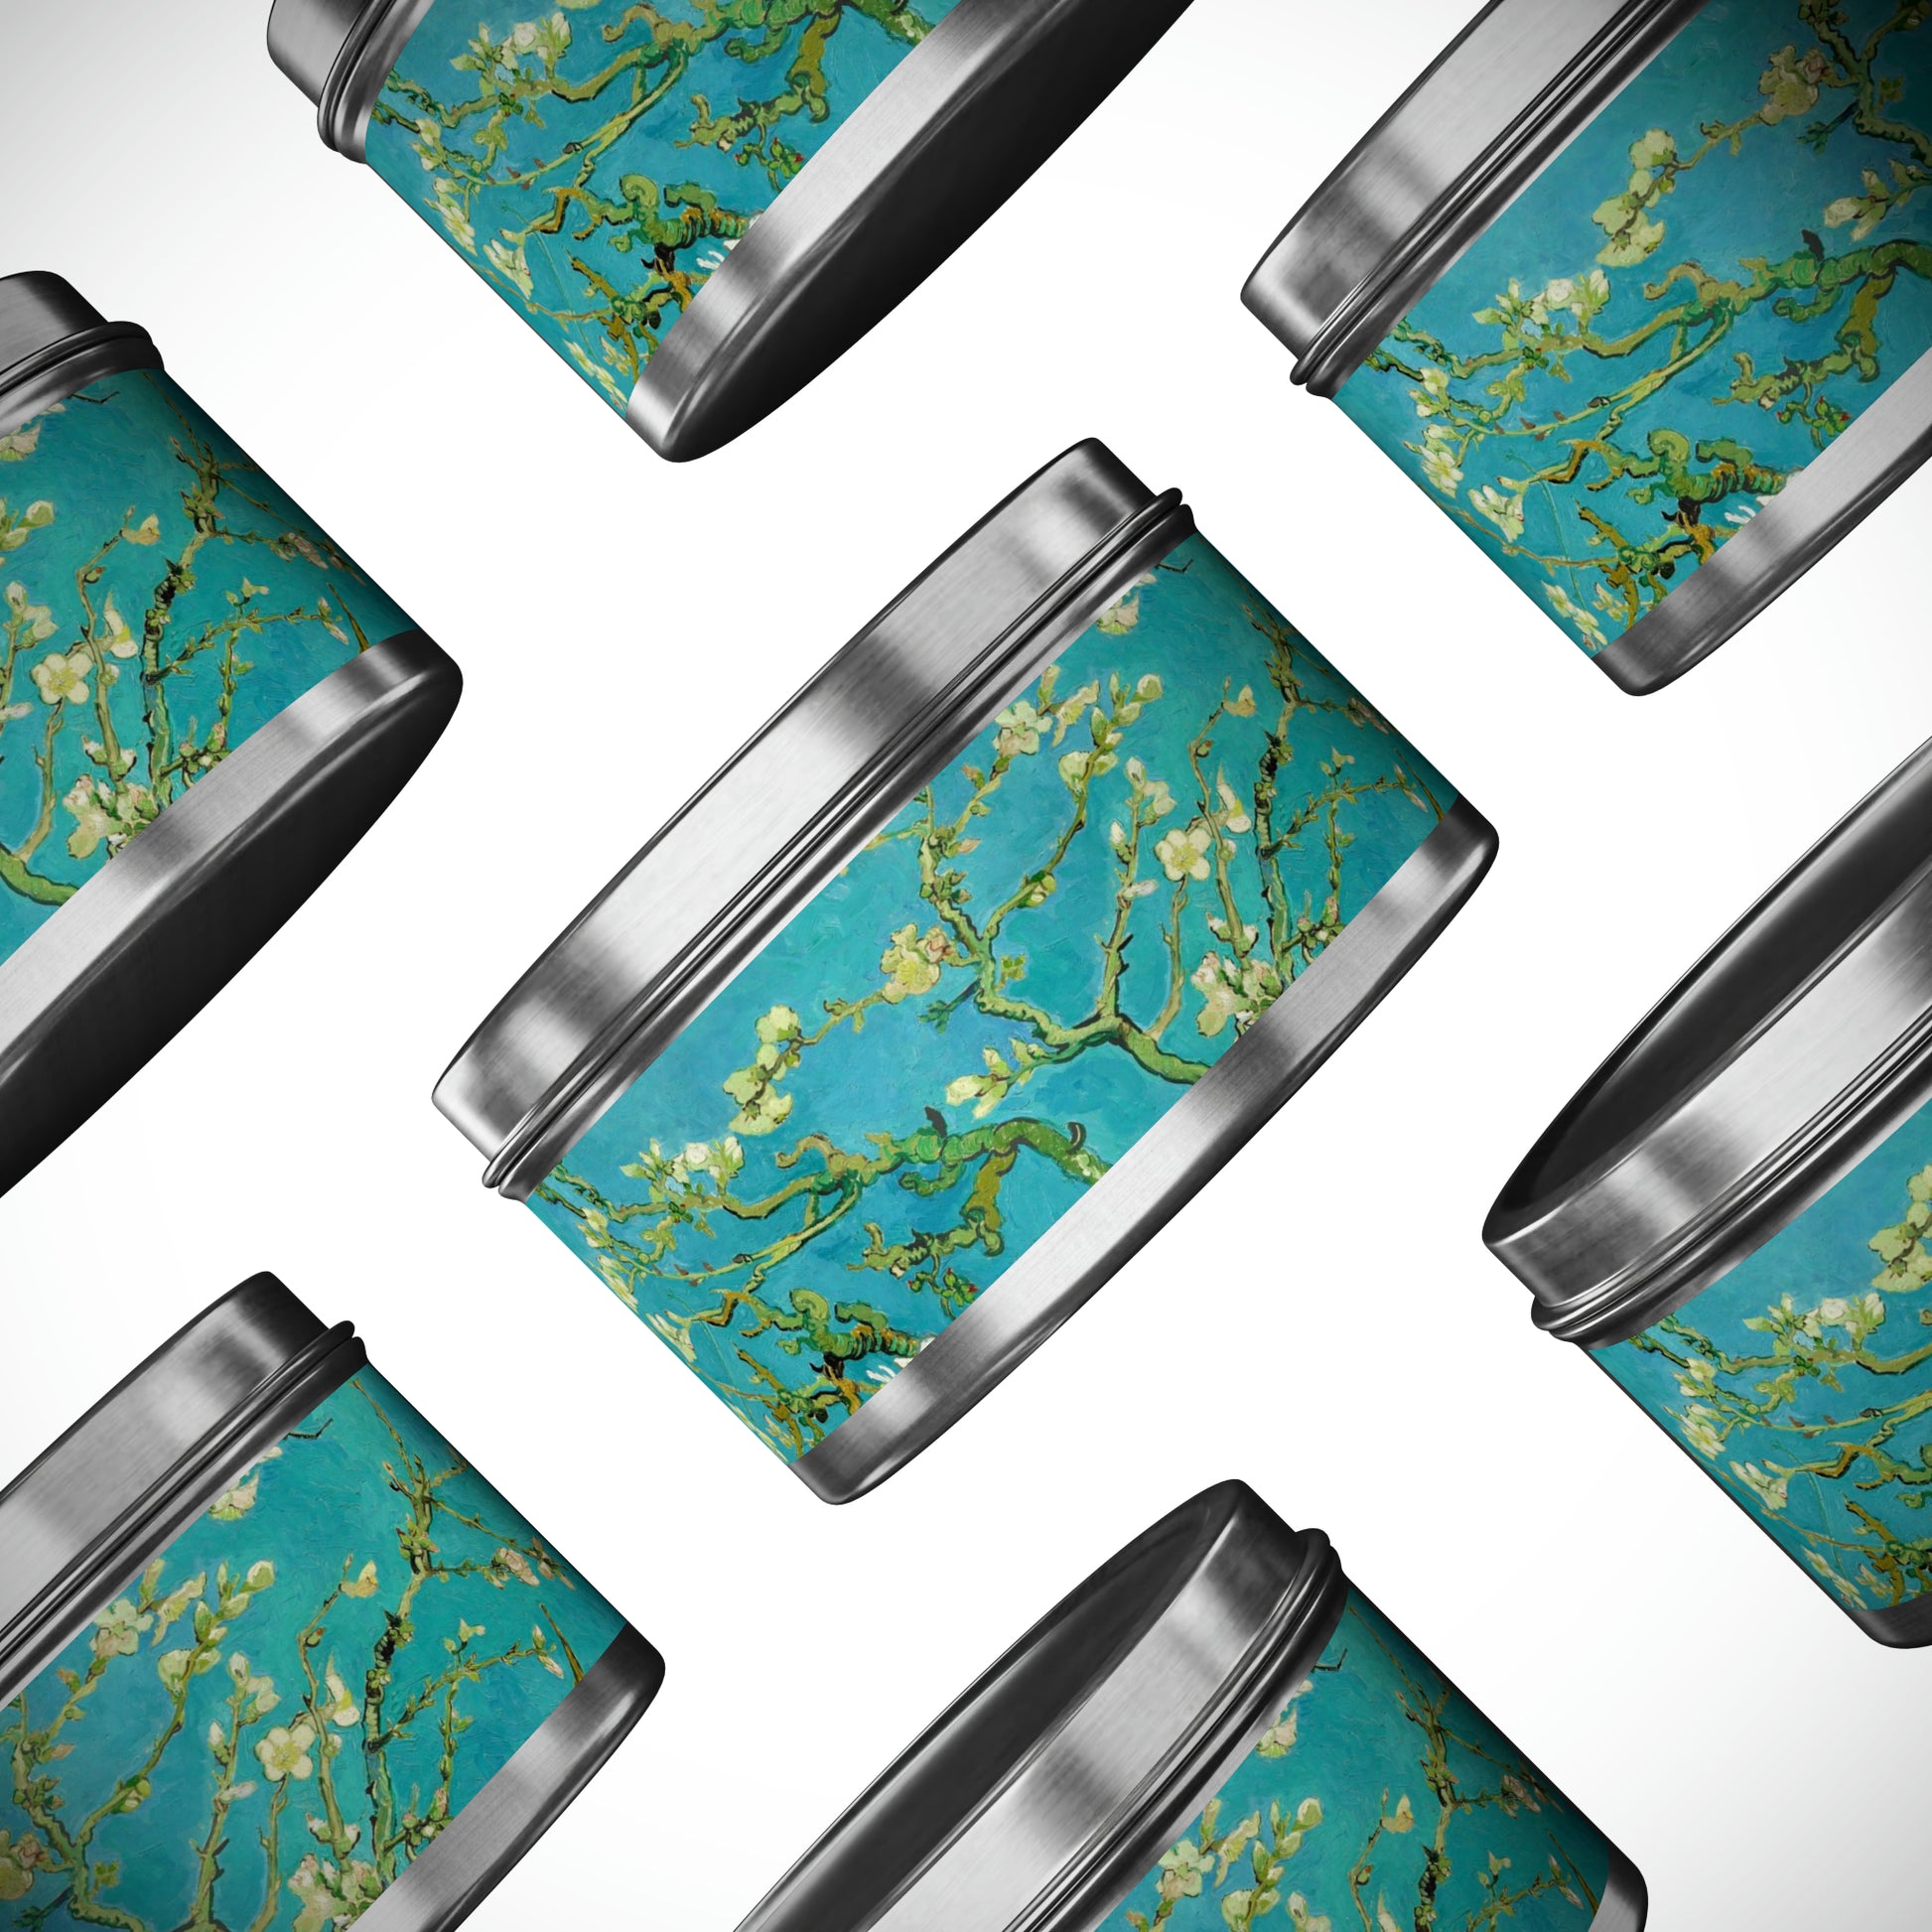 a group of tins with flowers painted on them